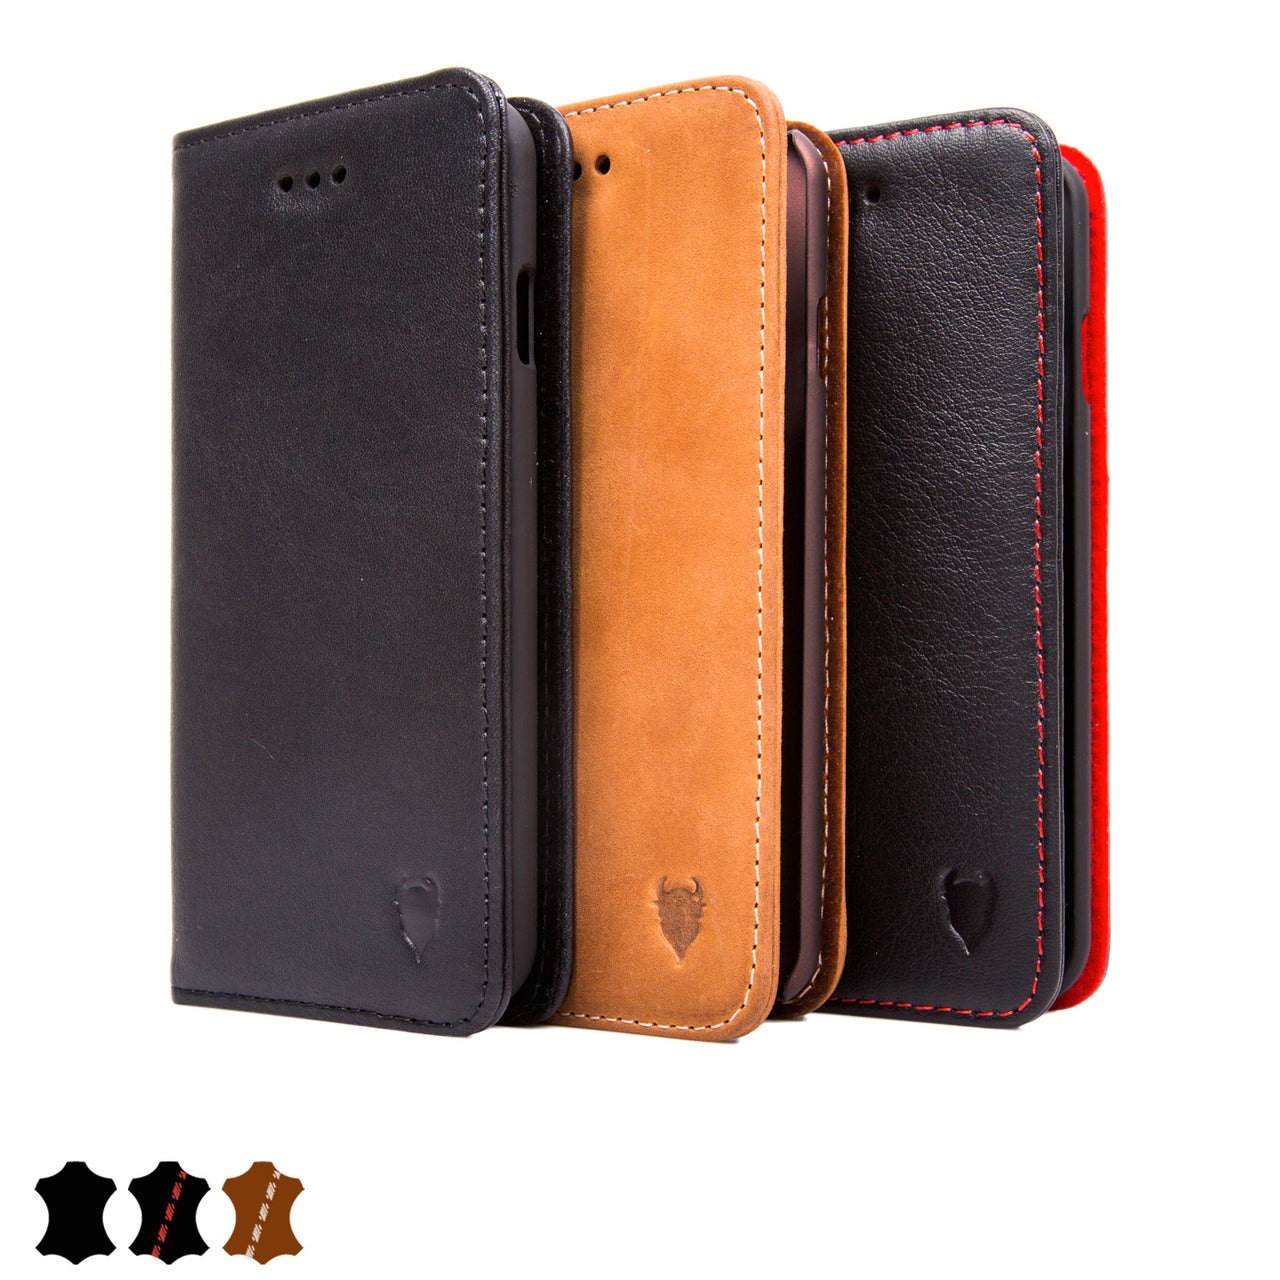 iPhone 6 / 6s Genuine Leather Case with Stand | Artisancover